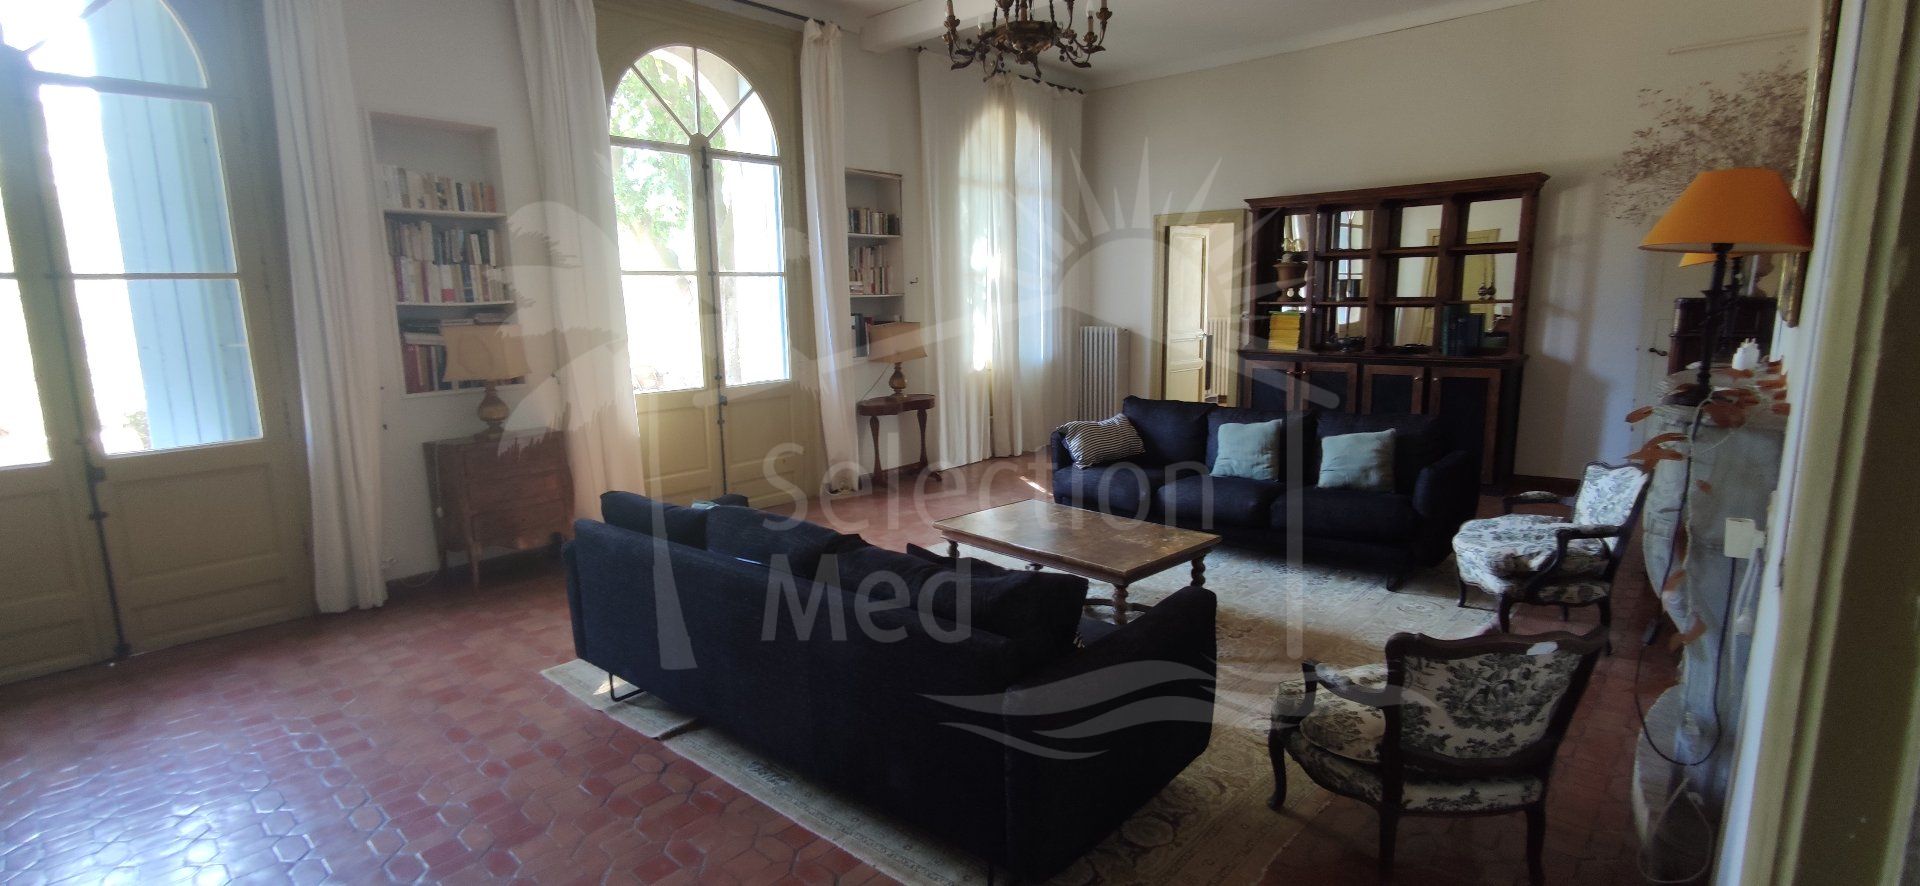 Exceptional mansion with 17 ha park, 500m2 of living space, 350m2 outbuilding, protected area in organic vineyards, close to amenities, 5 km from Béziers, superb view, great deal.